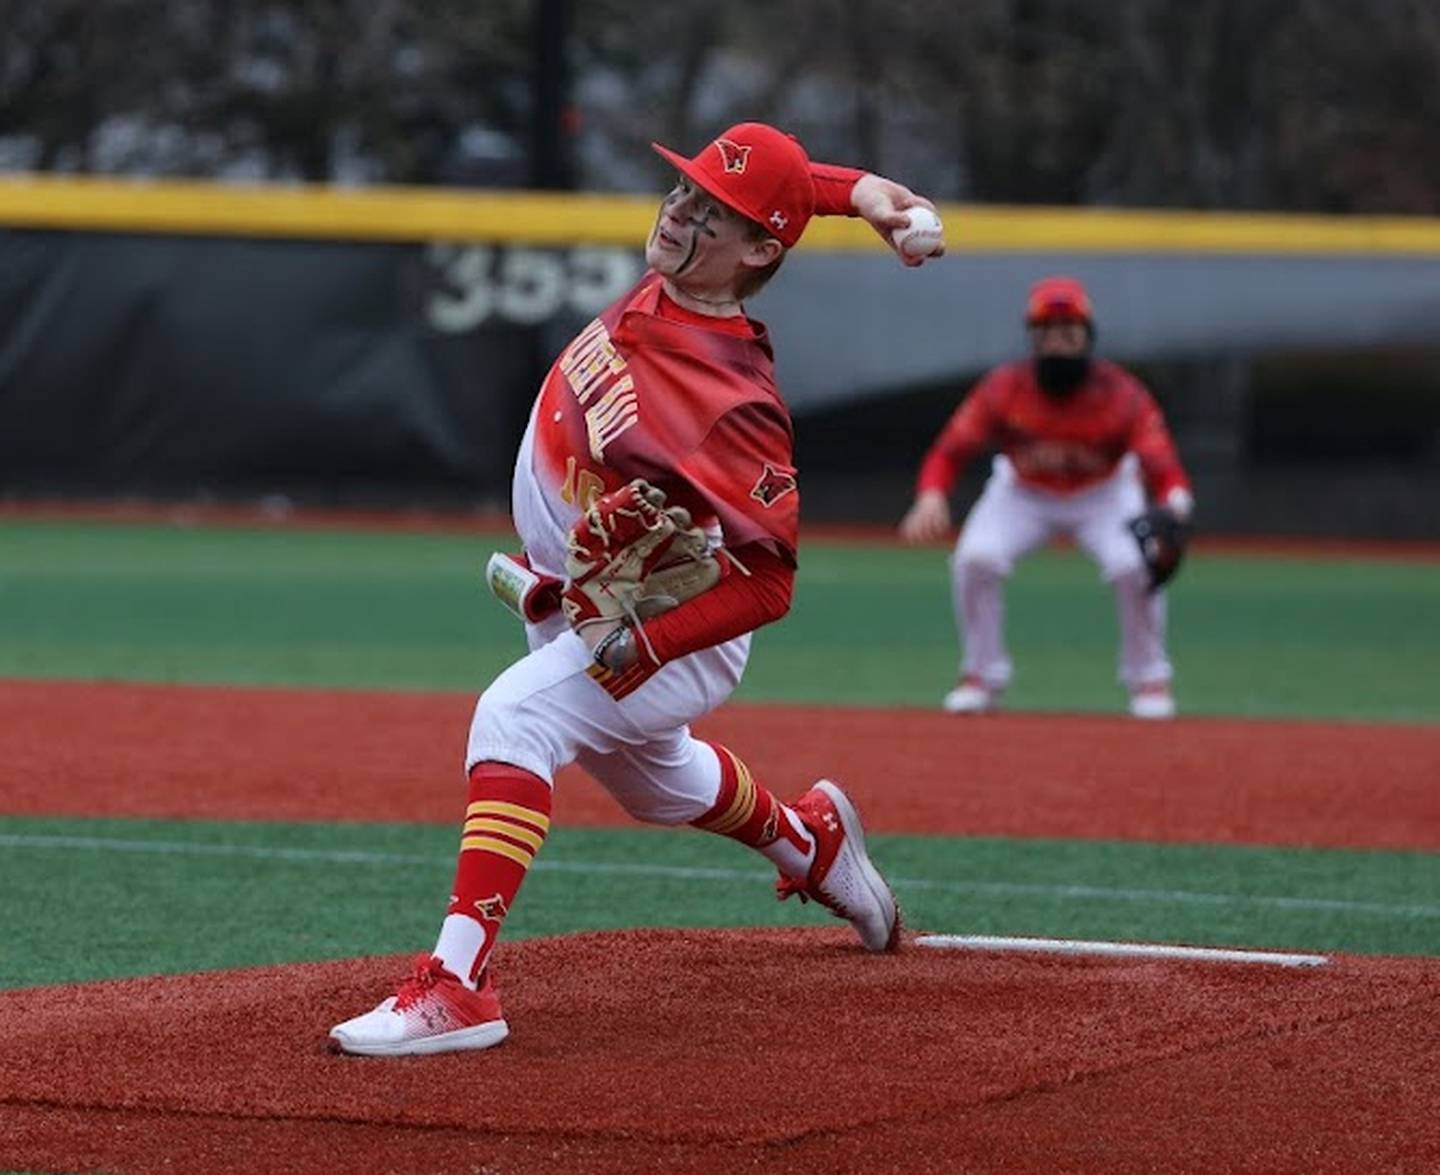 Kevin Seifert was impressive for Calvert Hall's baseball team Friday. The senior pitched a complete game 6-hitter as the Cardinals defeated No. 14 Mount St. Joseph in the opening round of the MIAA A Conference double elimination tournament.